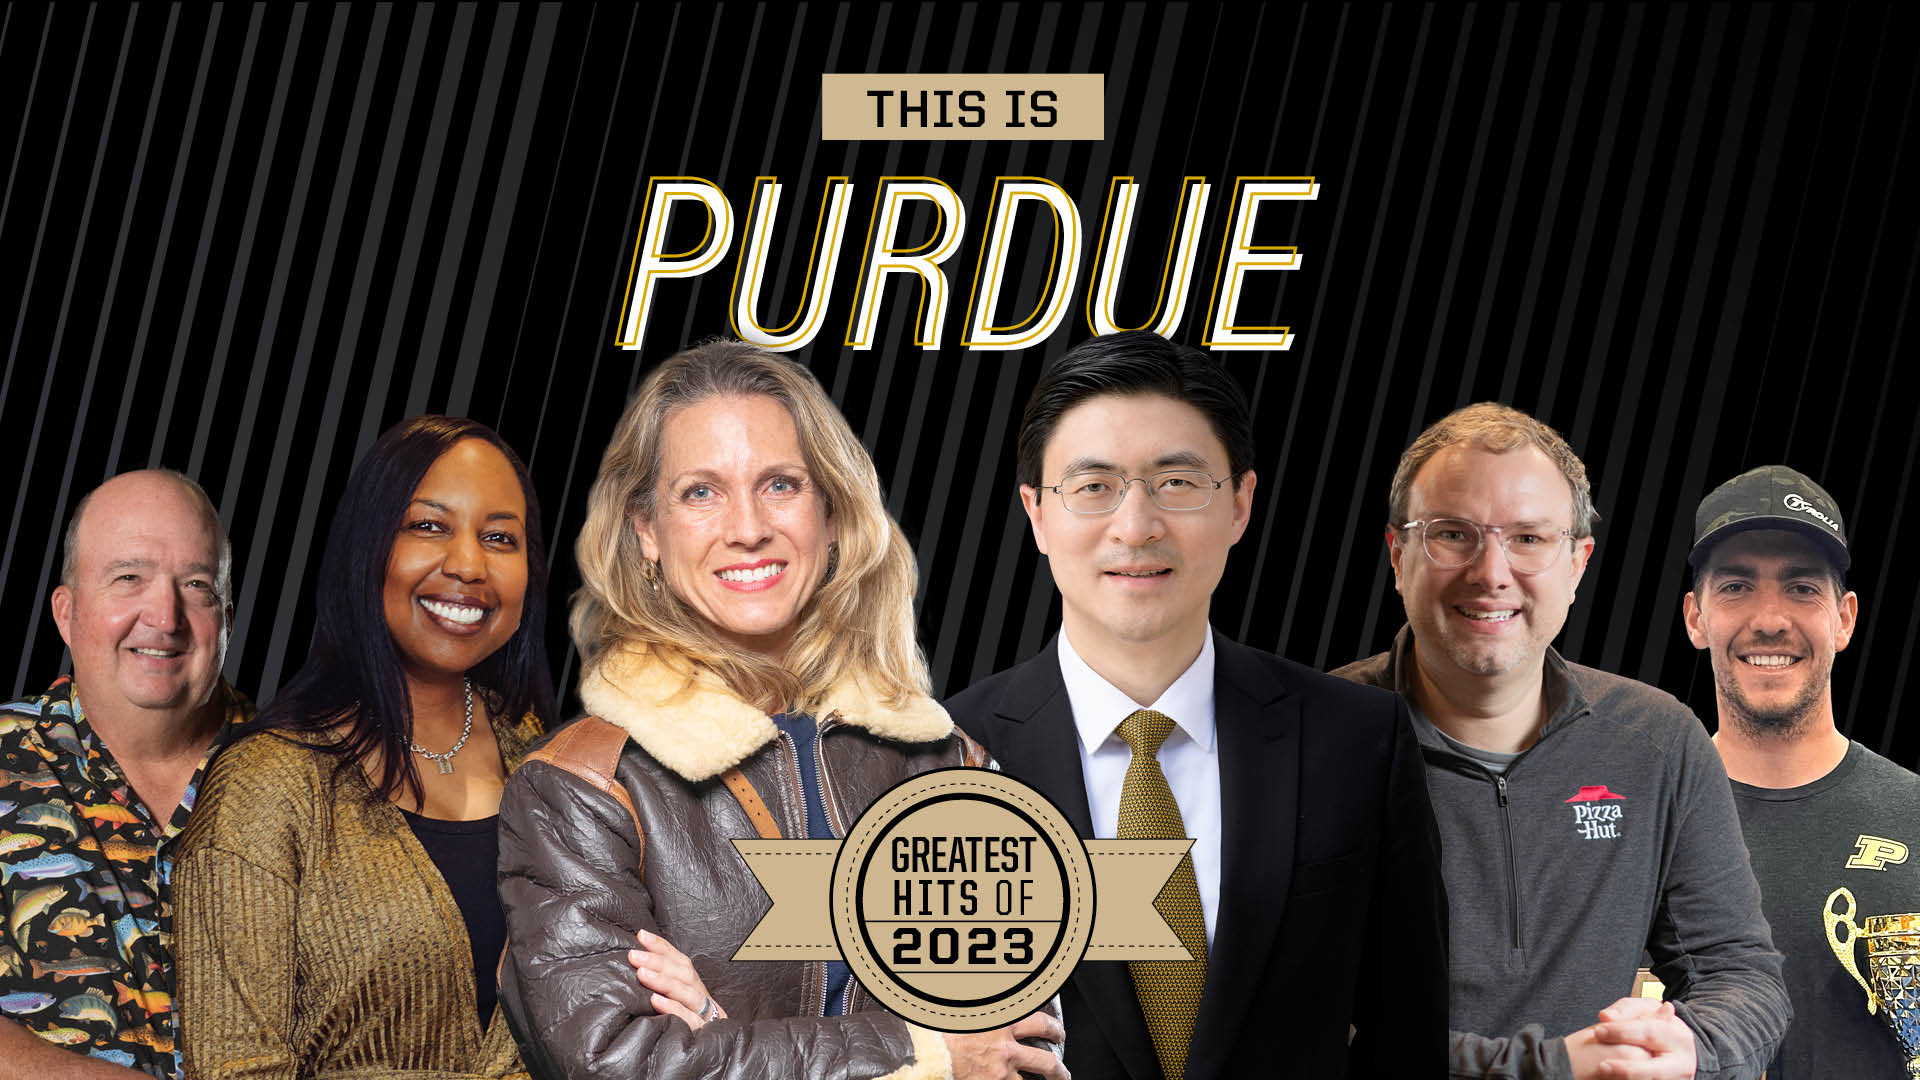 This is Purdue greatest hits of 2023